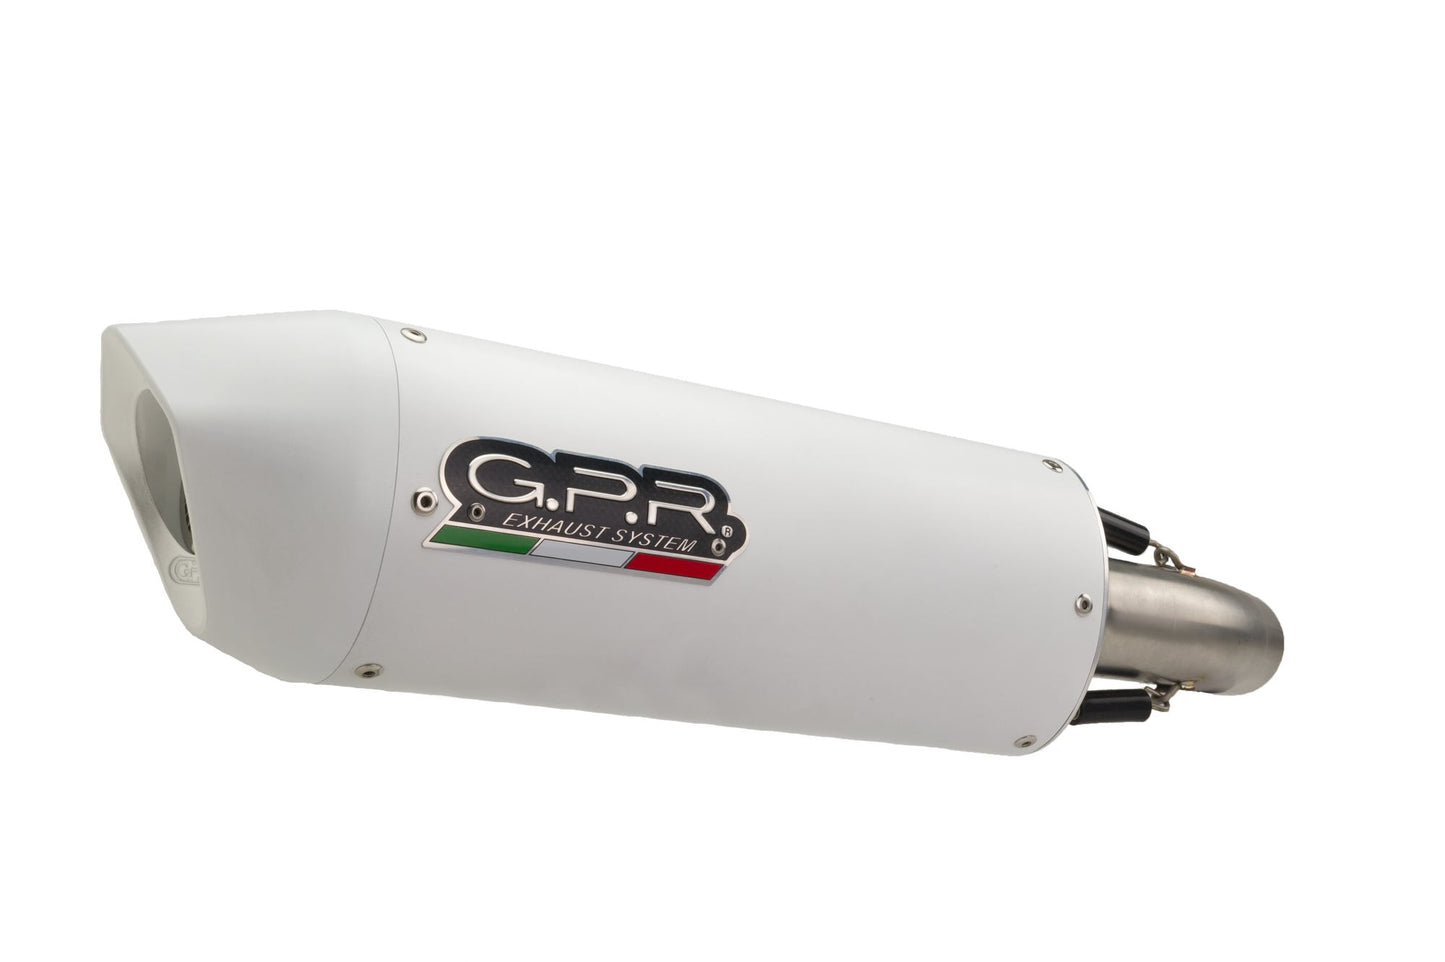 GPR Exhaust for Bmw S1000R 2014-2016, Albus Ceramic, Slip-on Exhaust Including Removable DB Killer and Link Pipe